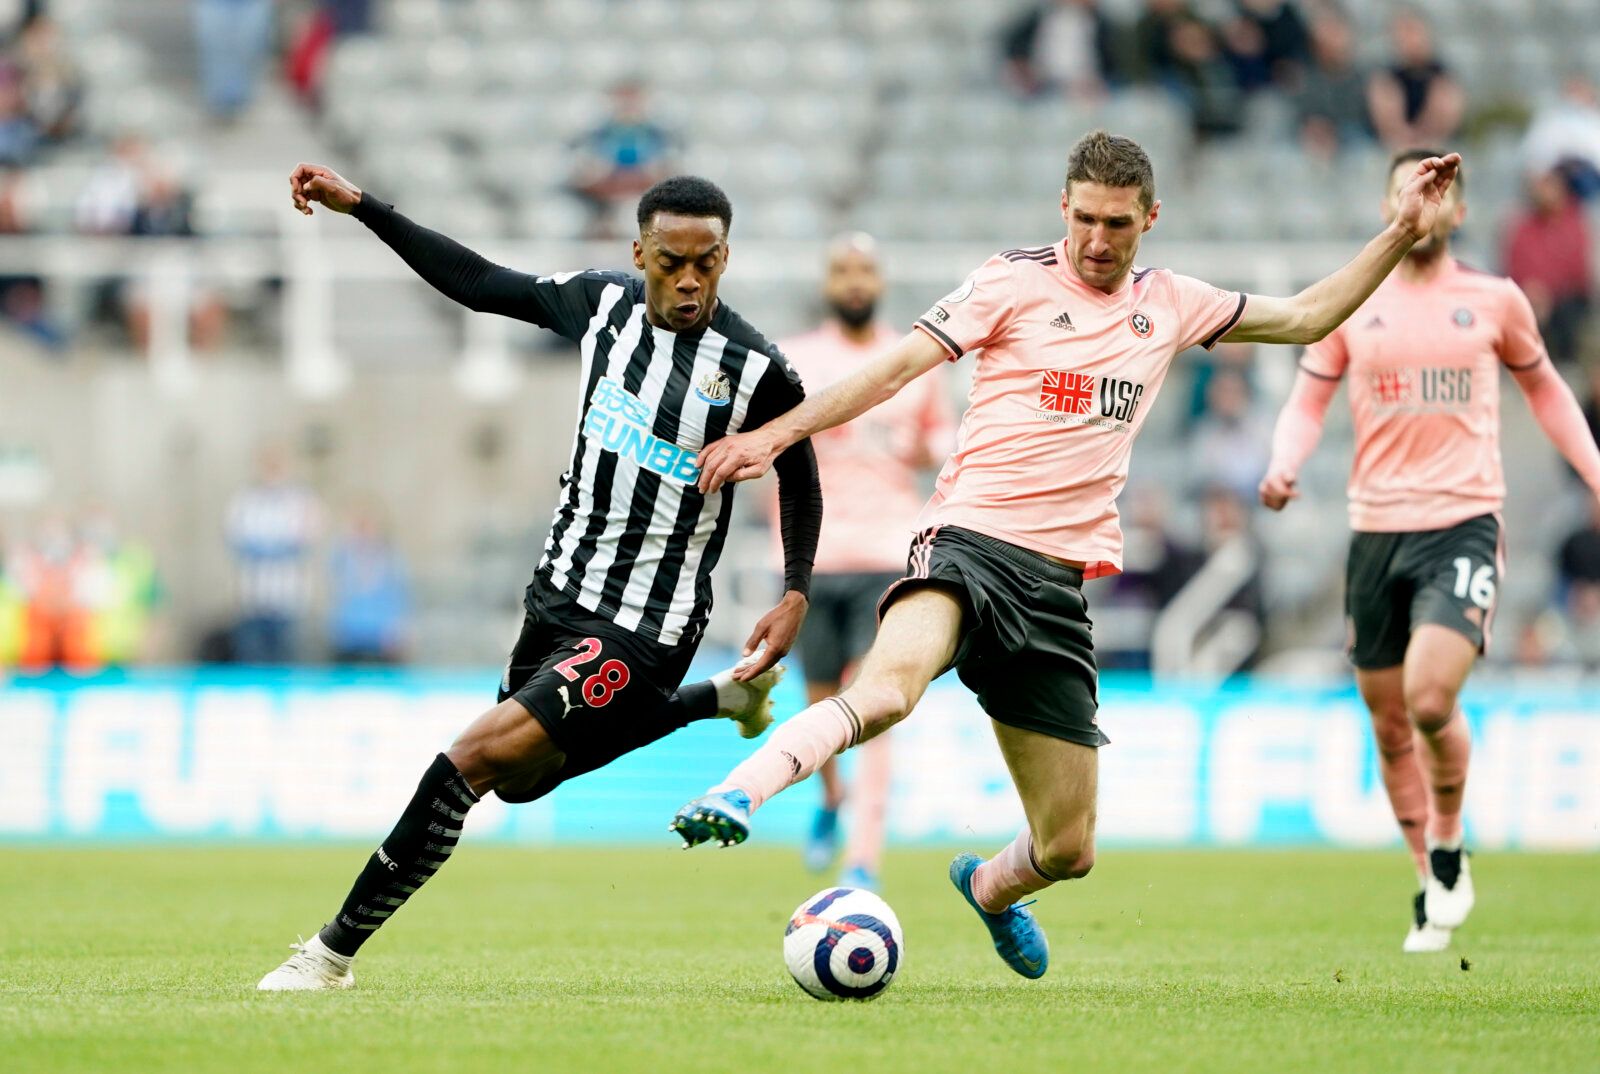 Soccer Football - Premier League - Newcastle United v Sheffield United - St James' Park, Newcastle, Britain - May 19, 2021 Newcastle United's Joseph Willock in action with Sheffield United's Chris Basham Pool via REUTERS/Owen Humphreys EDITORIAL USE ONLY. No use with unauthorized audio, video, data, fixture lists, club/league logos or 'live' services. Online in-match use limited to 75 images, no video emulation. No use in betting, games or single club /league/player publications.  Please contact